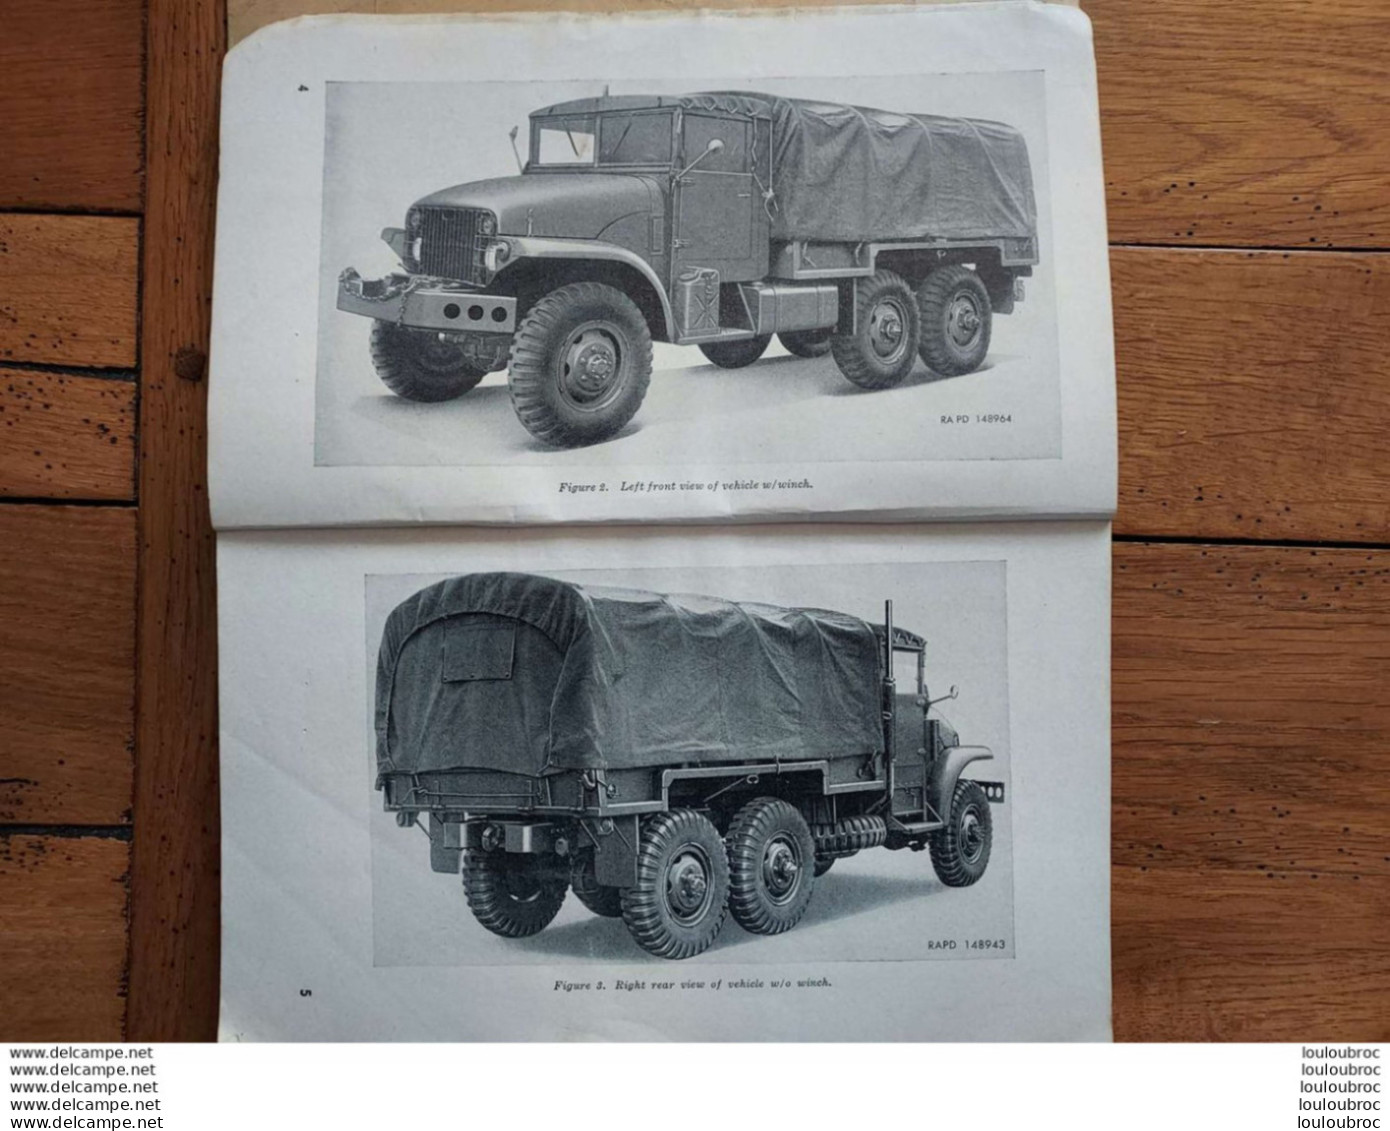 TECHNICAL MANUAL TM9-819A  6X6 TRUCK M135  JULY 1951 OF THE ARMY  437 PAGES ECRIT EN ANGLAIS - Cars